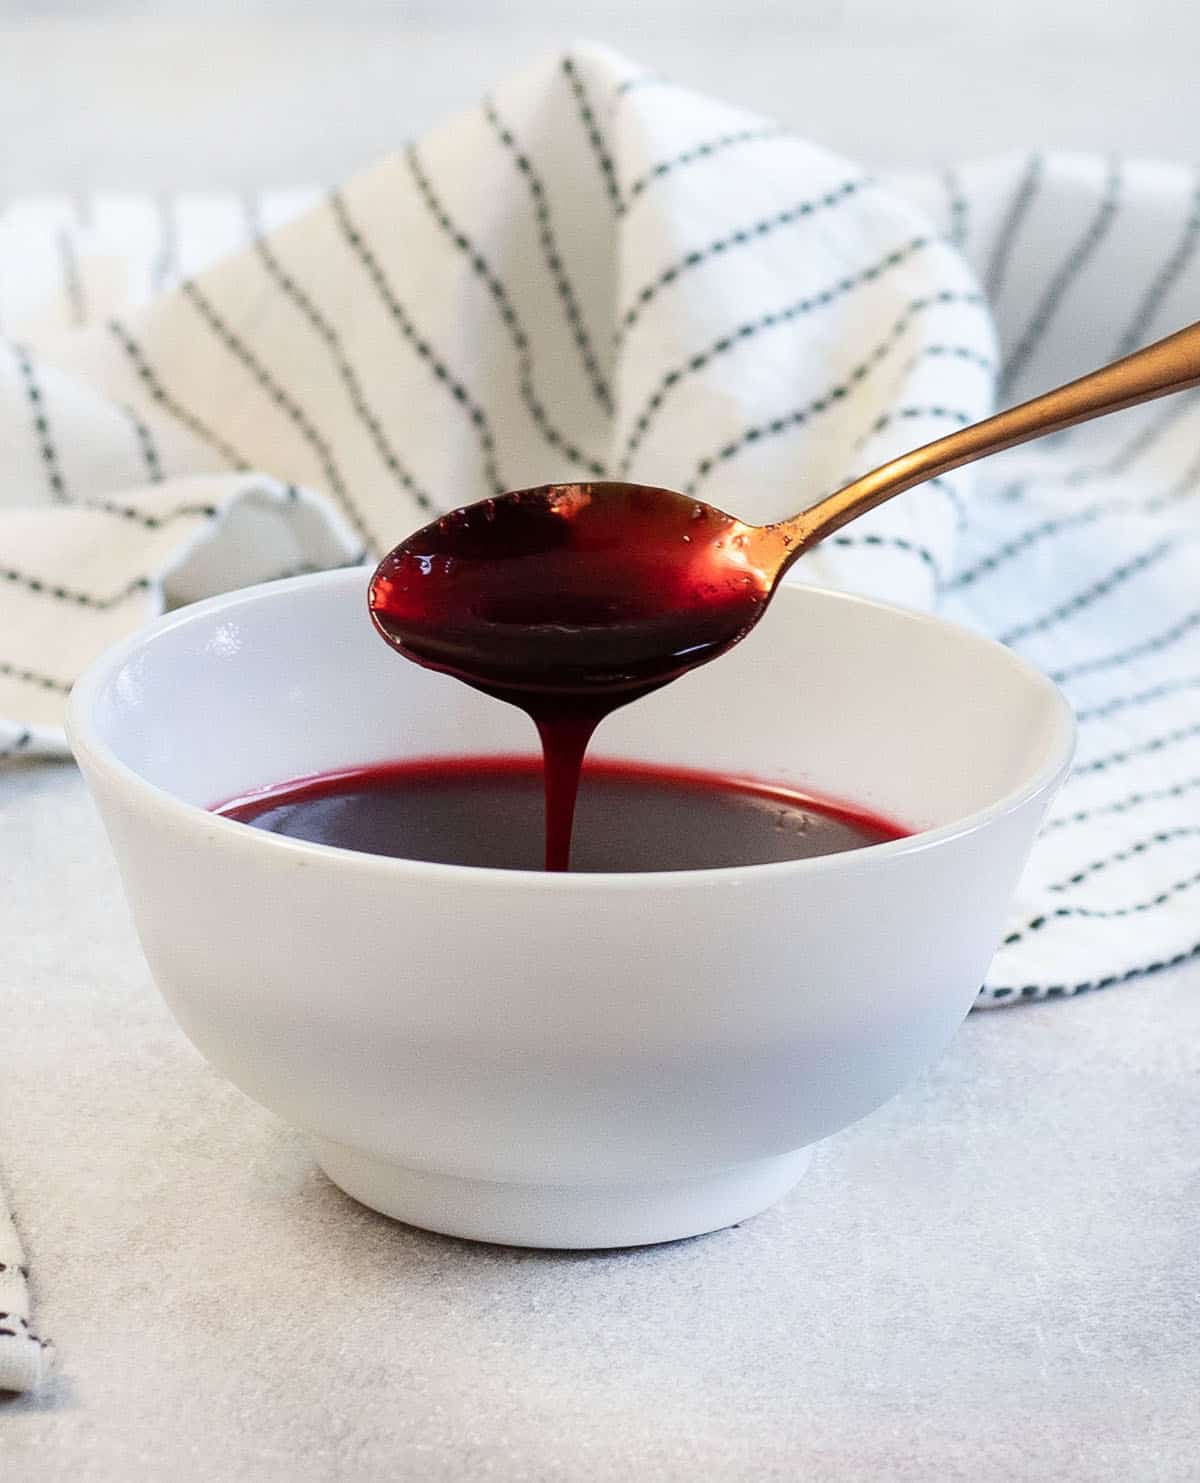 Blackberry Simple Syrup in a bowl.